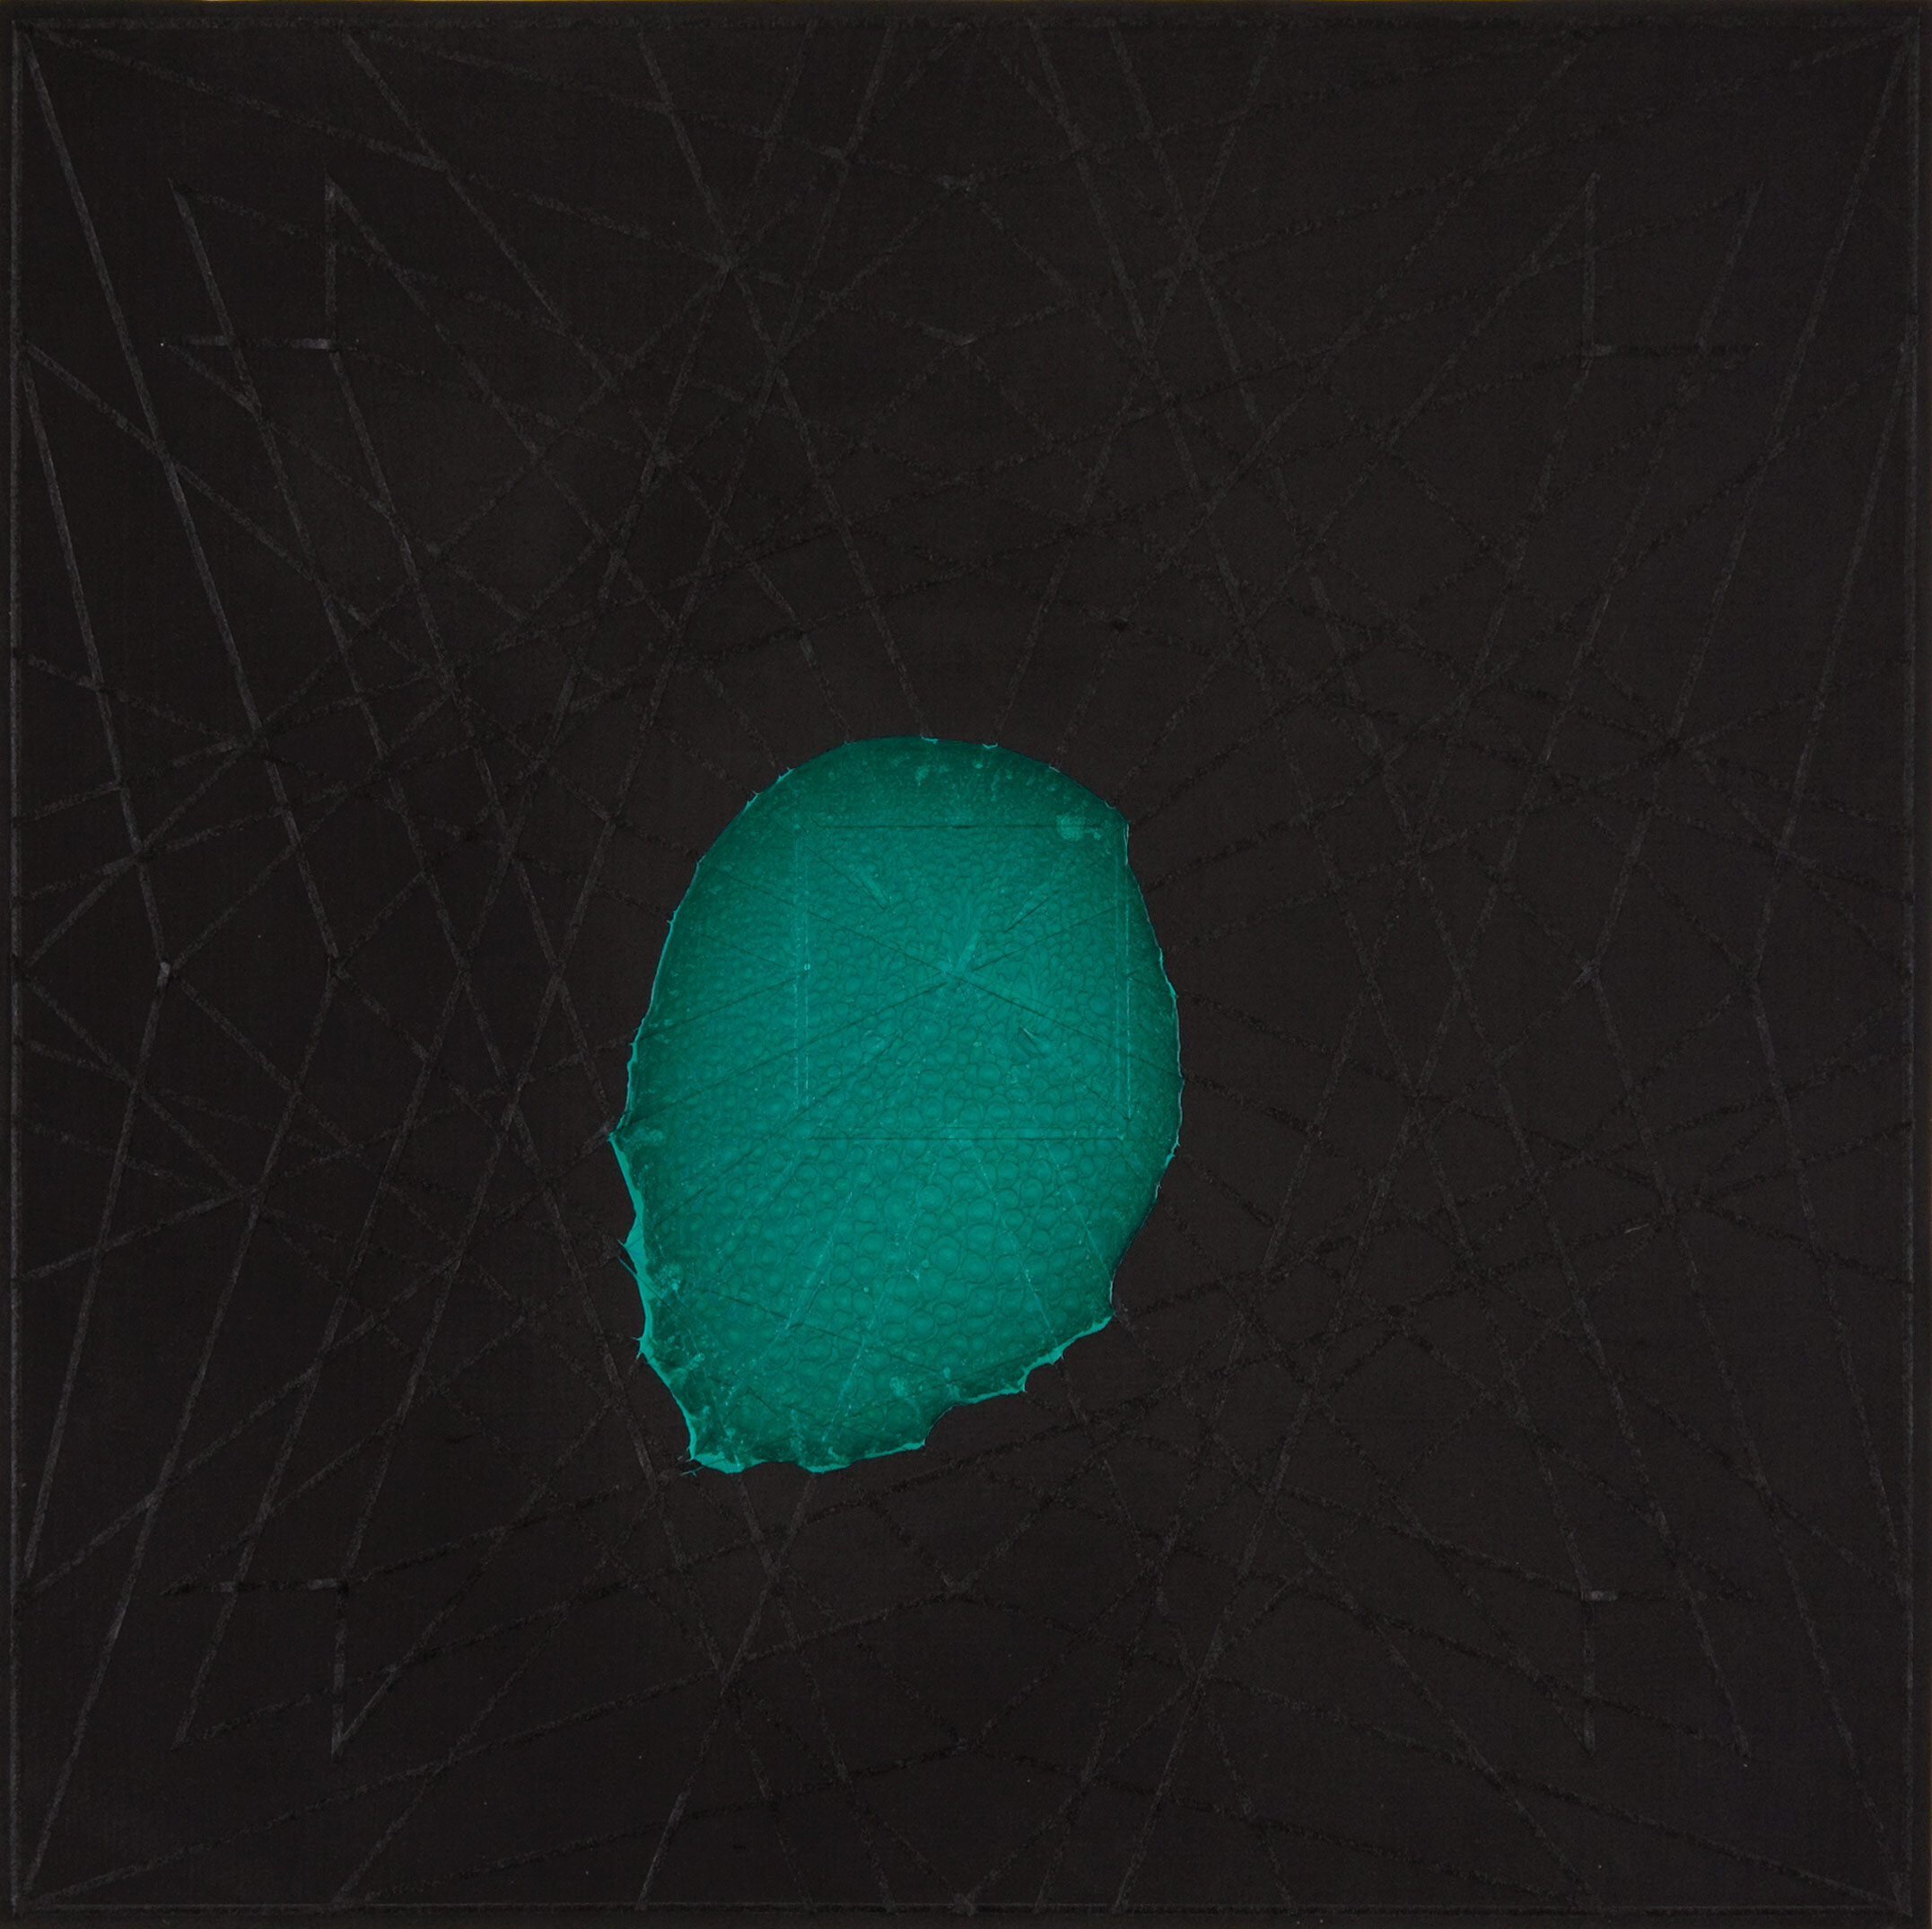    Emerald Dollop II    Ink, acrylic, and tape on wood panel  12” x 12”   